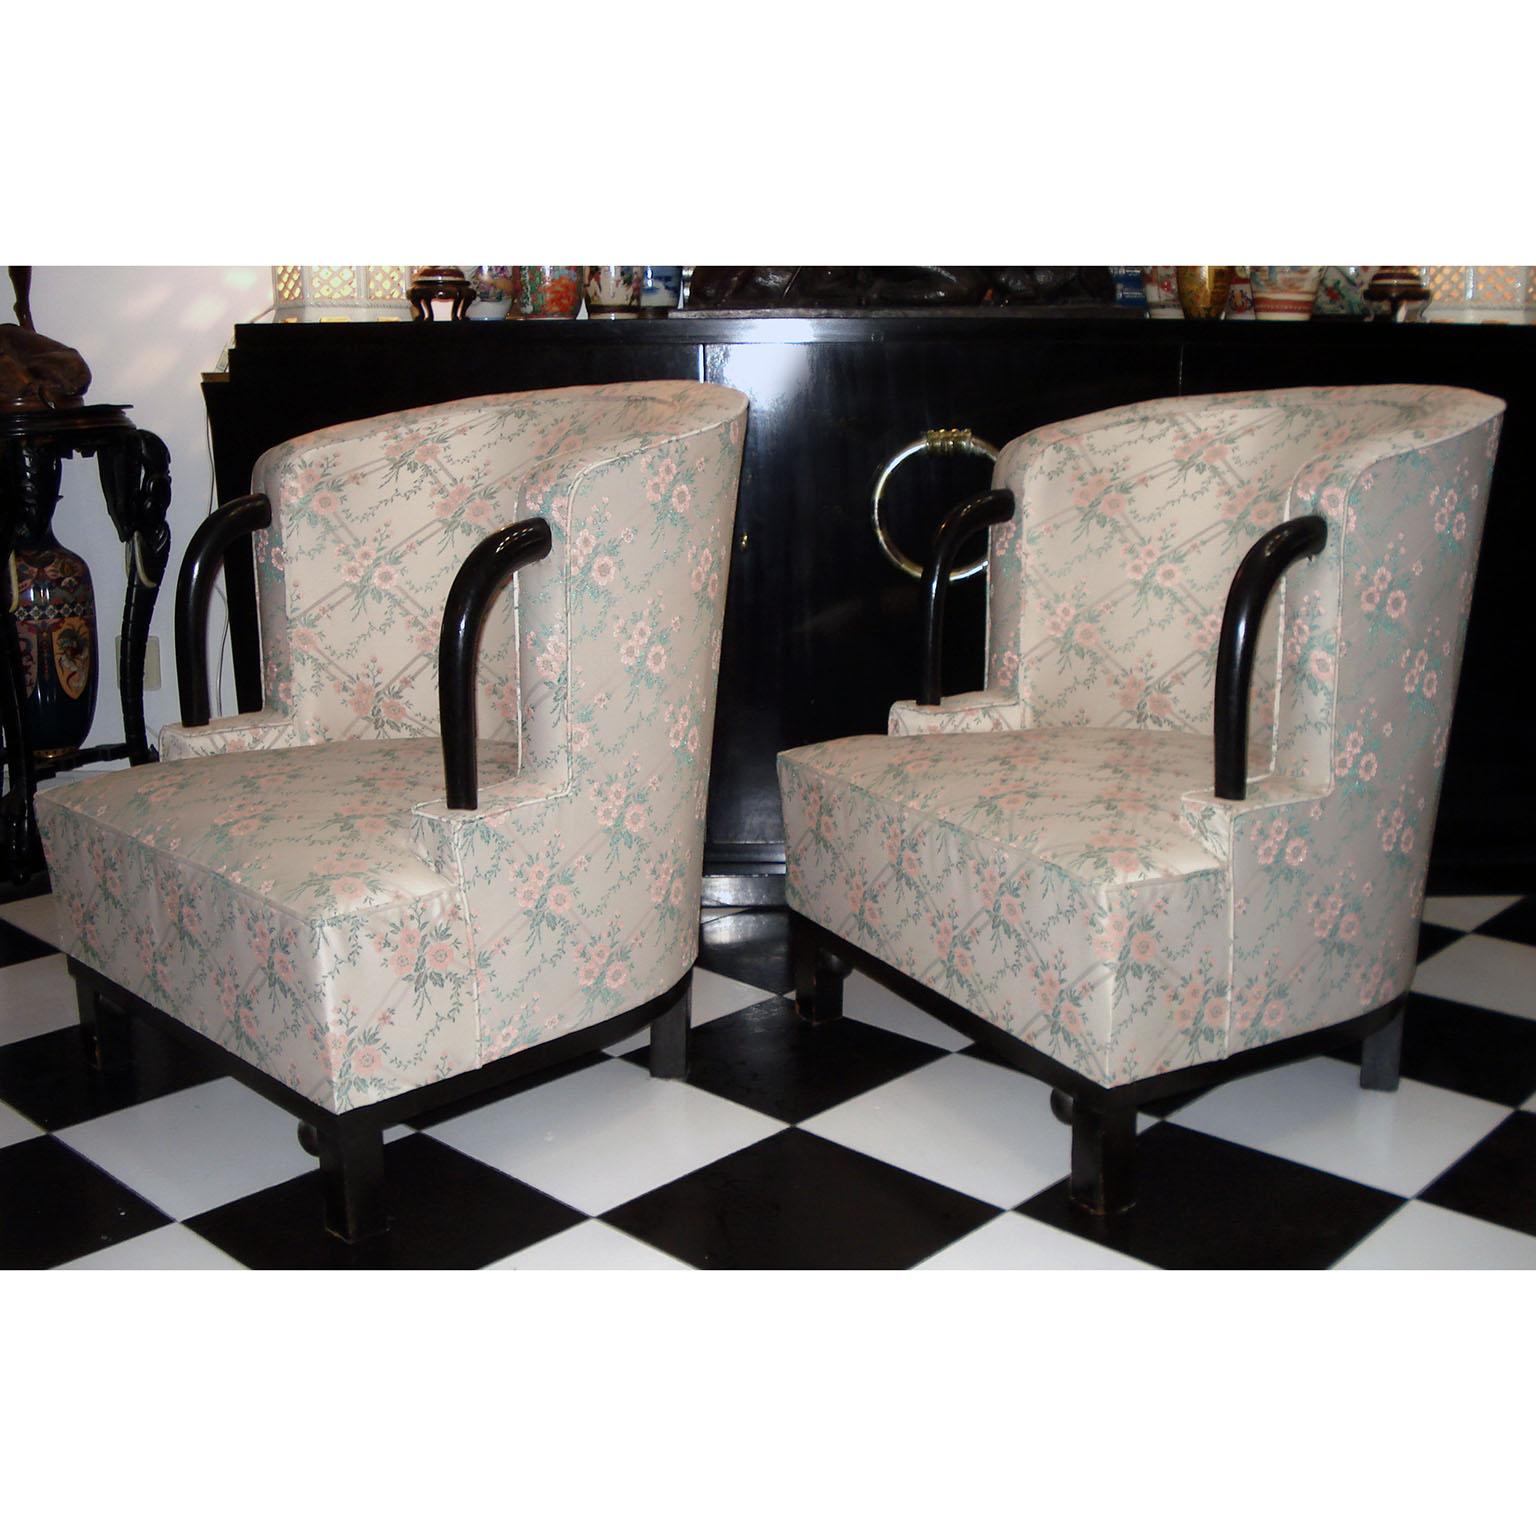 Upholstery Unique Pair of Art Deco Armchairs by Hubert Martin et Ploquin, France, 1930s For Sale